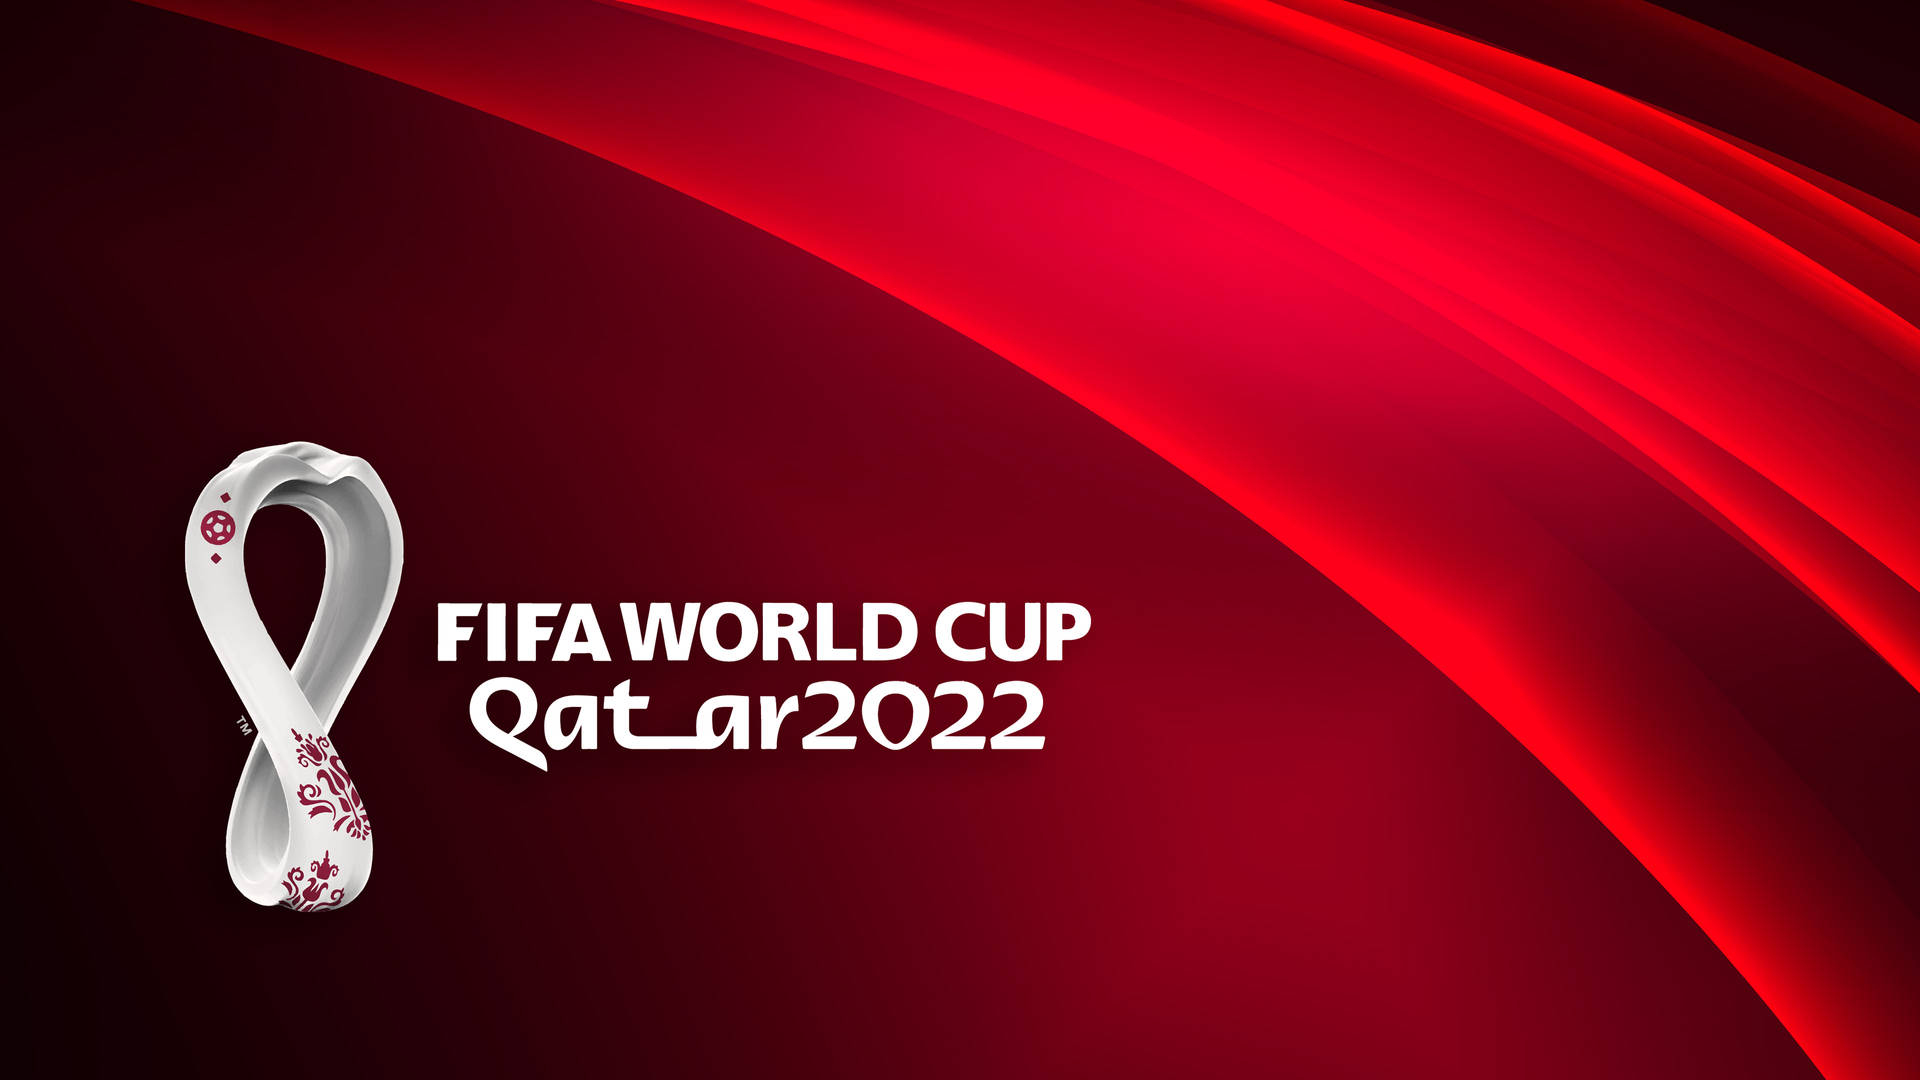 Welcome to Qatar 2022, the next edition of the World Cup! Wallpaper